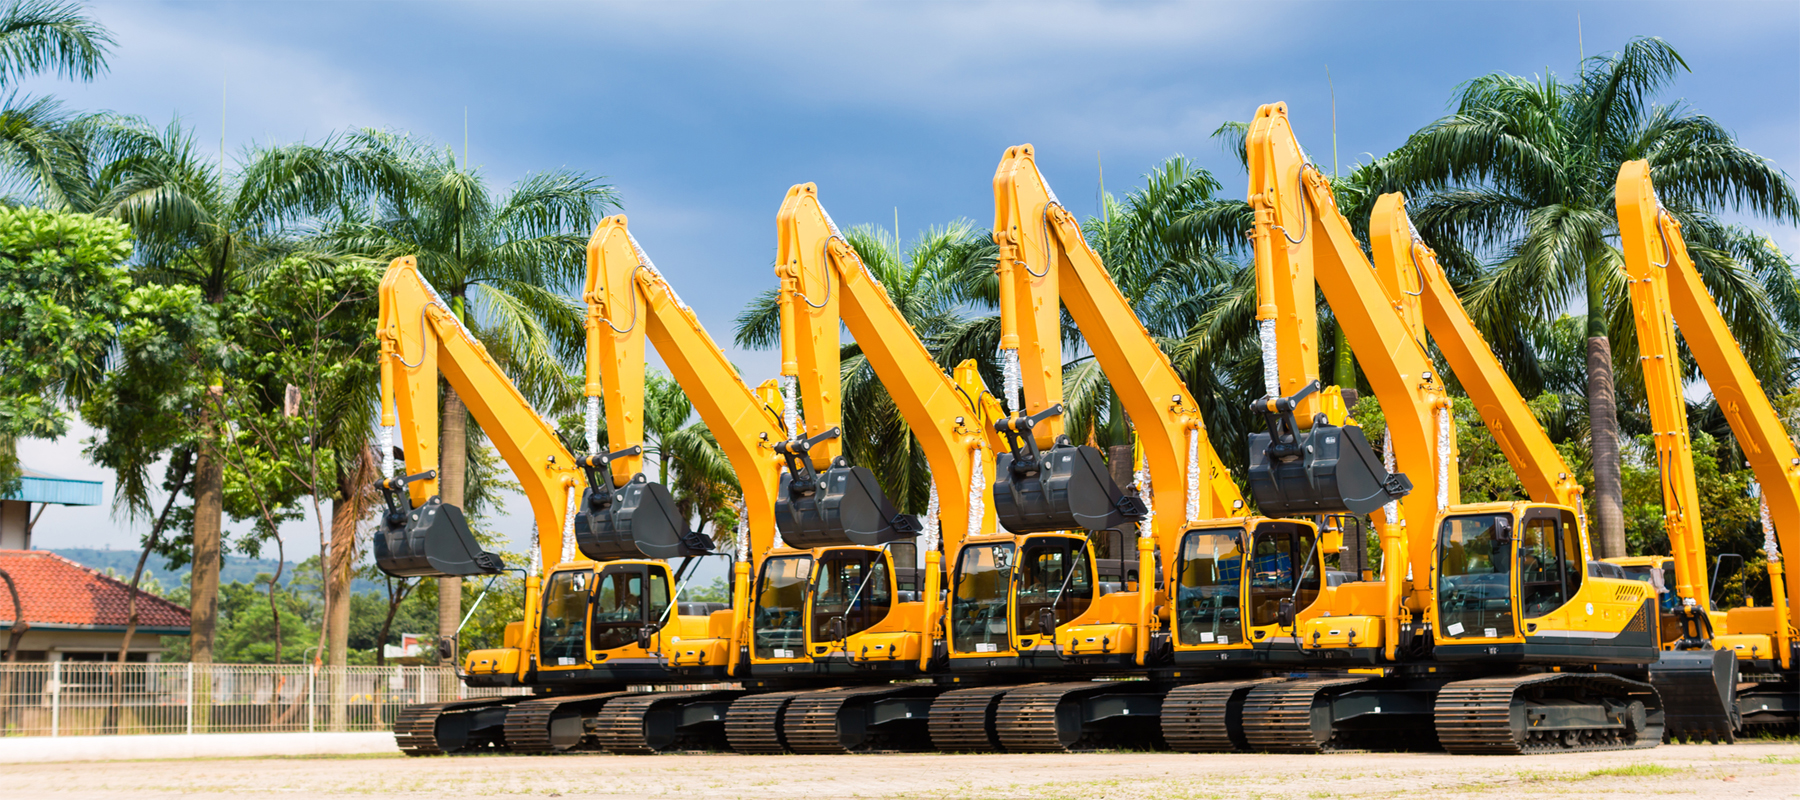 A Row of Excavators Ready to be Rented